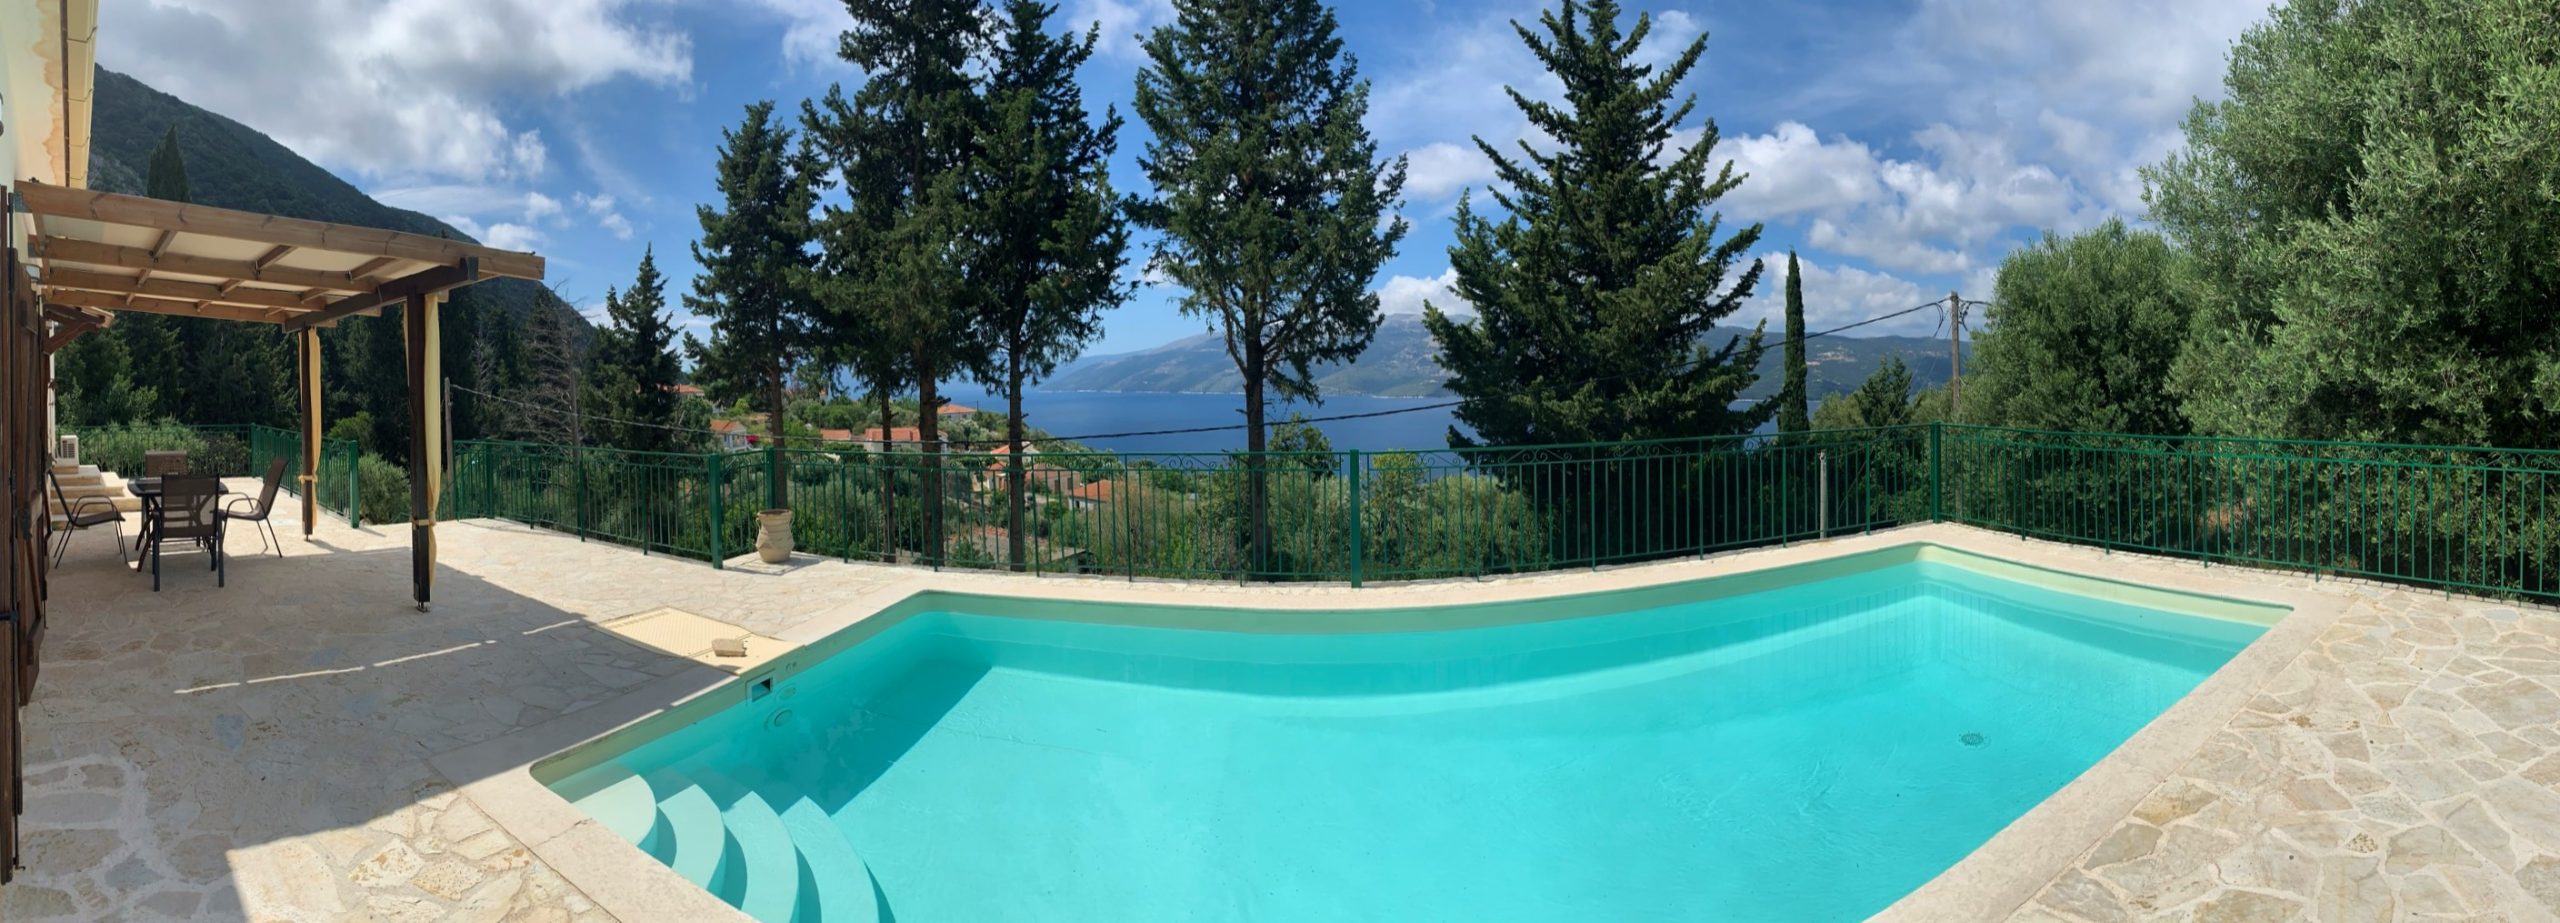 Swimming pool area of property for sale on Ithaca Greece, Lefki